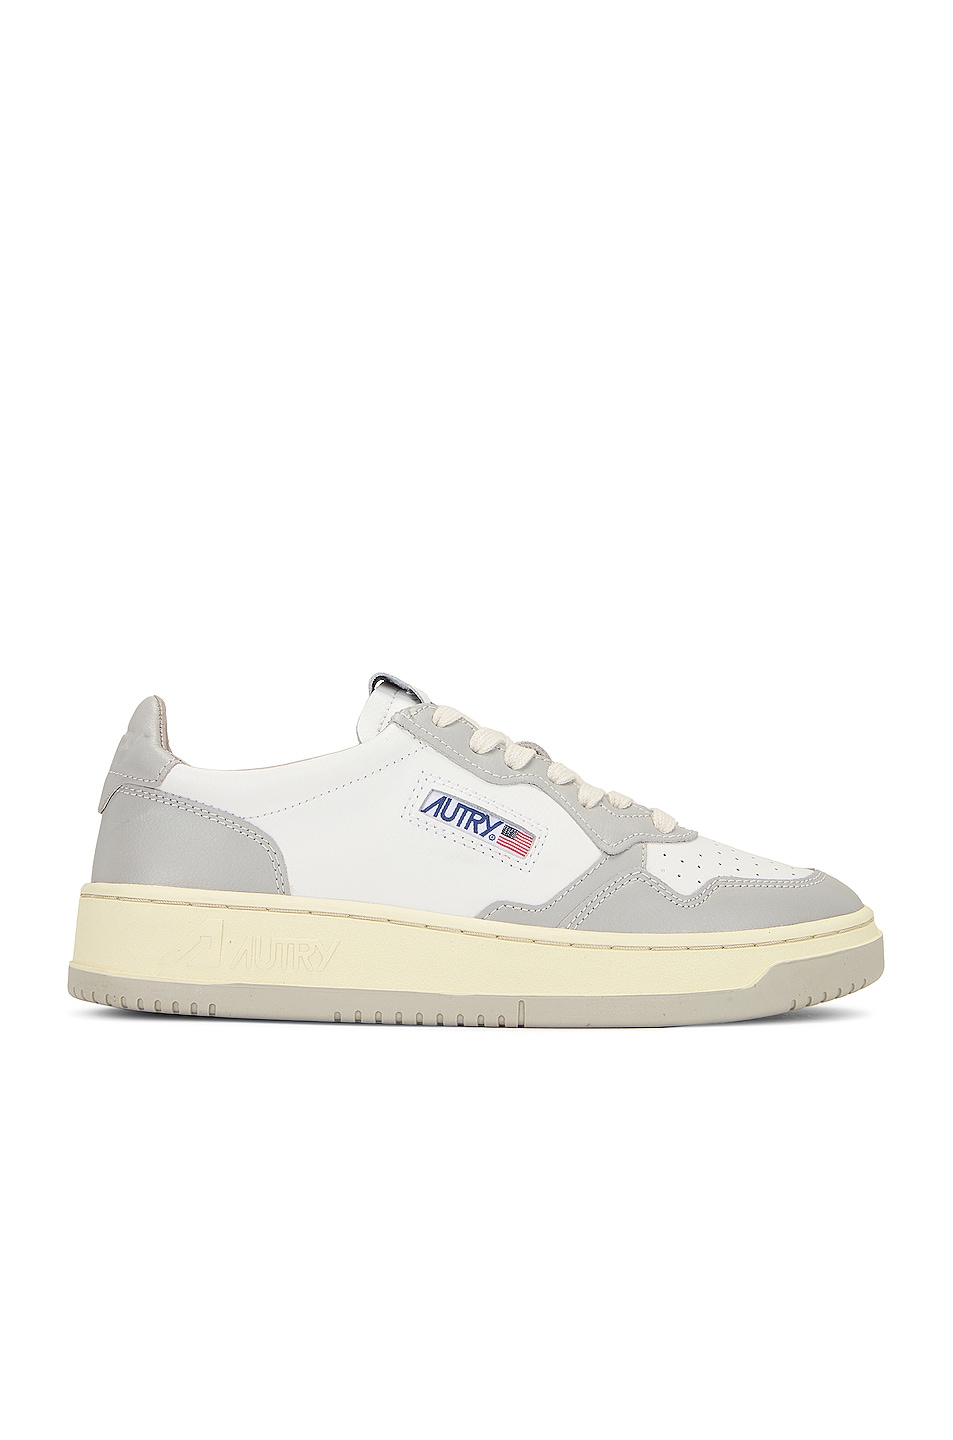 Image 1 of Autry Medalist Low Sneaker in White & Vapor